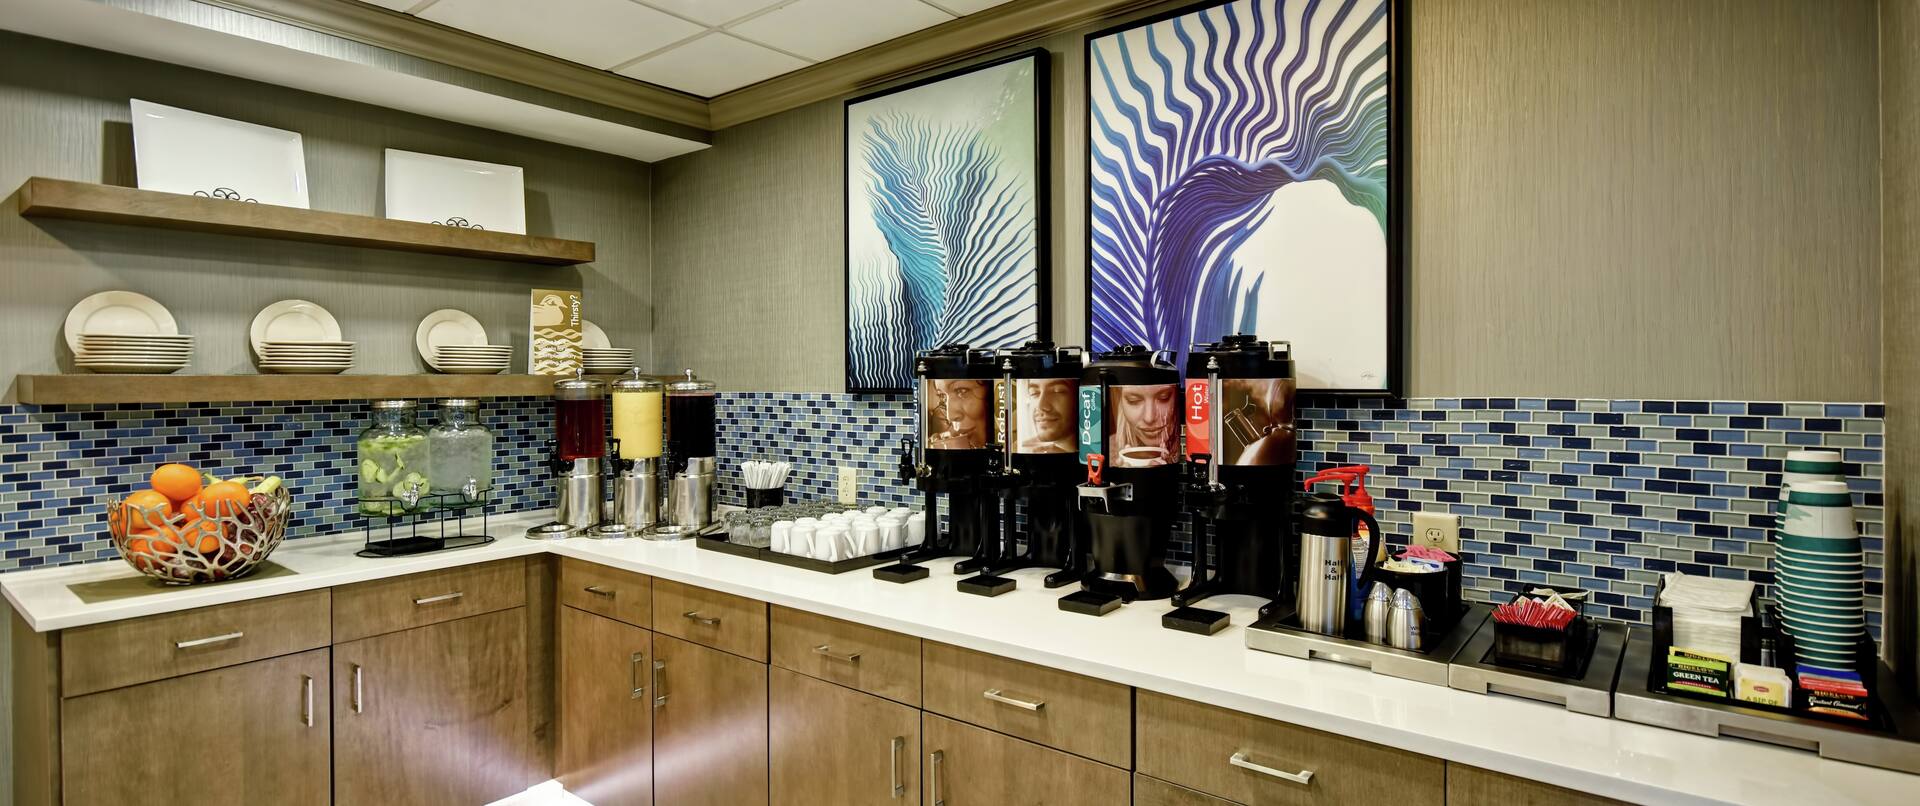 Hotel Breakfast Buffet And Coffee Station